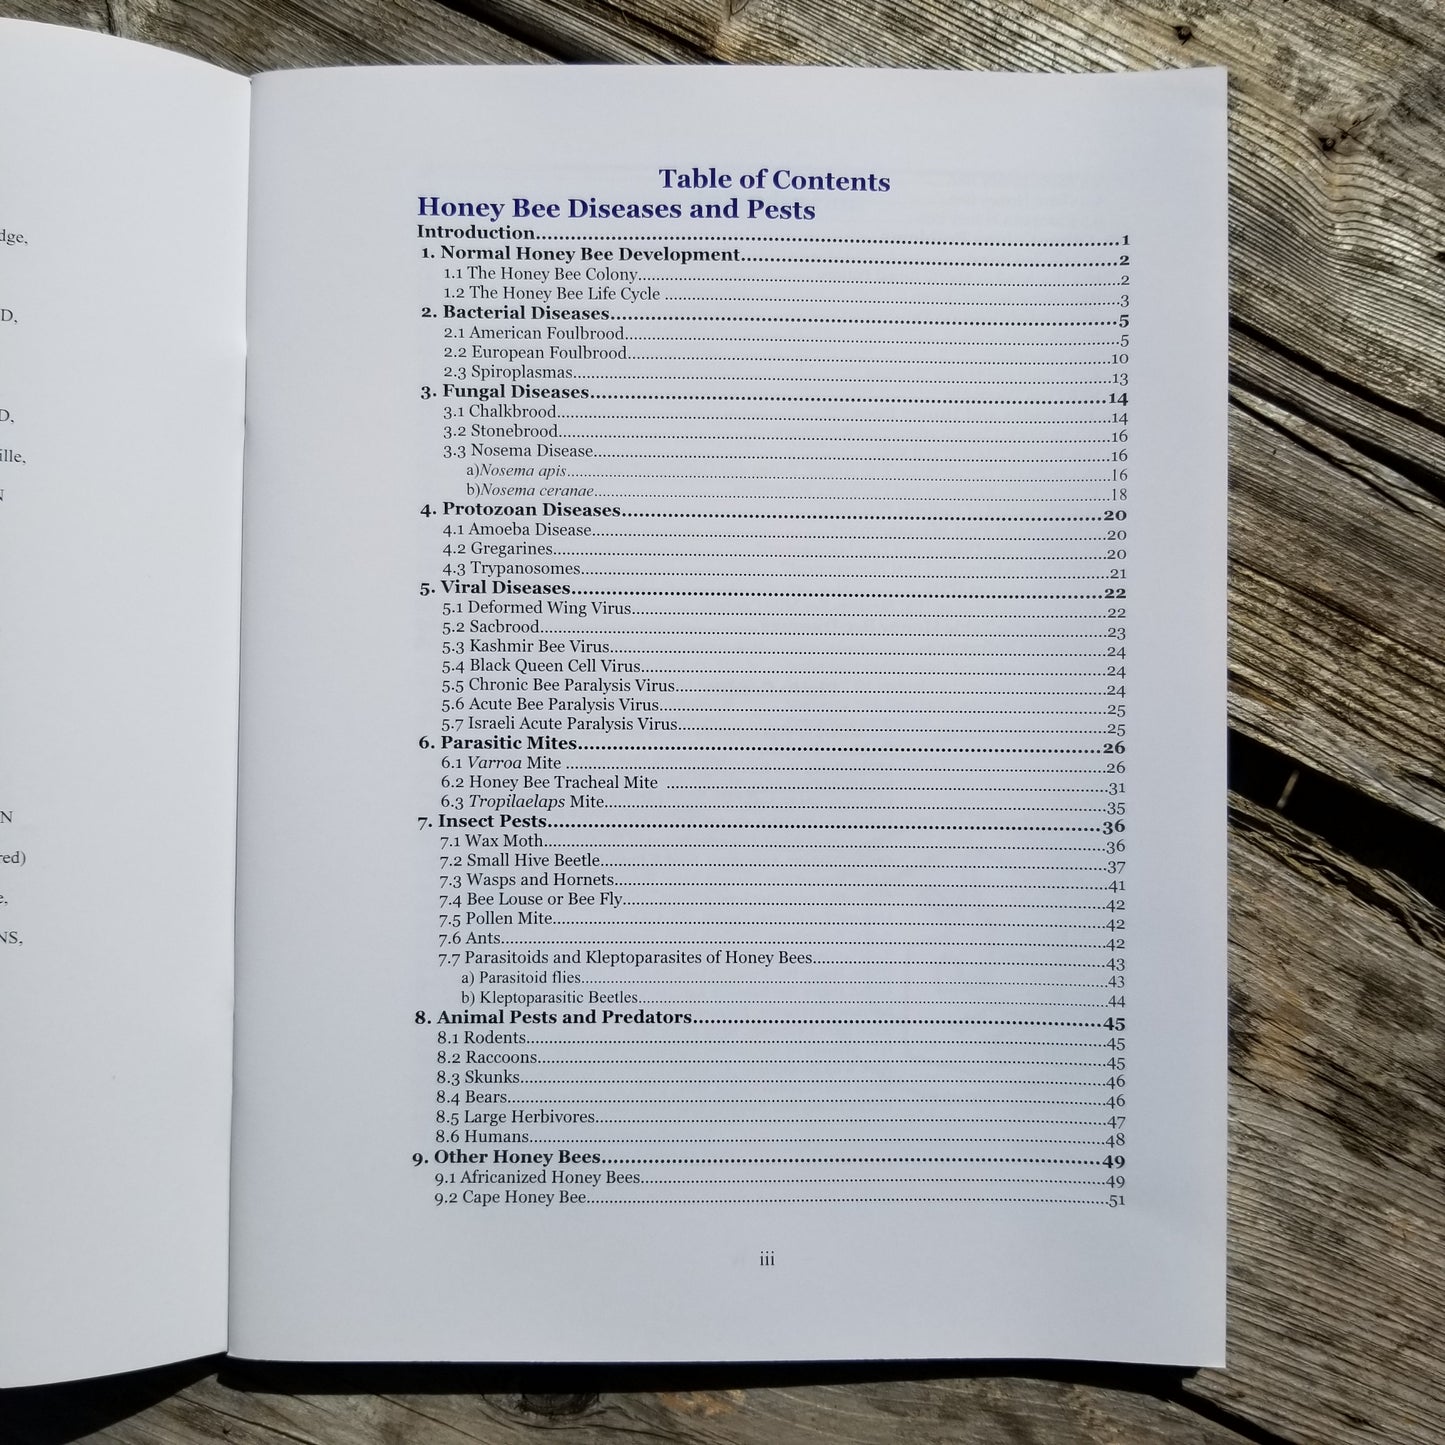 Table of Contents; Honey Bee Diseases & Pests Manual